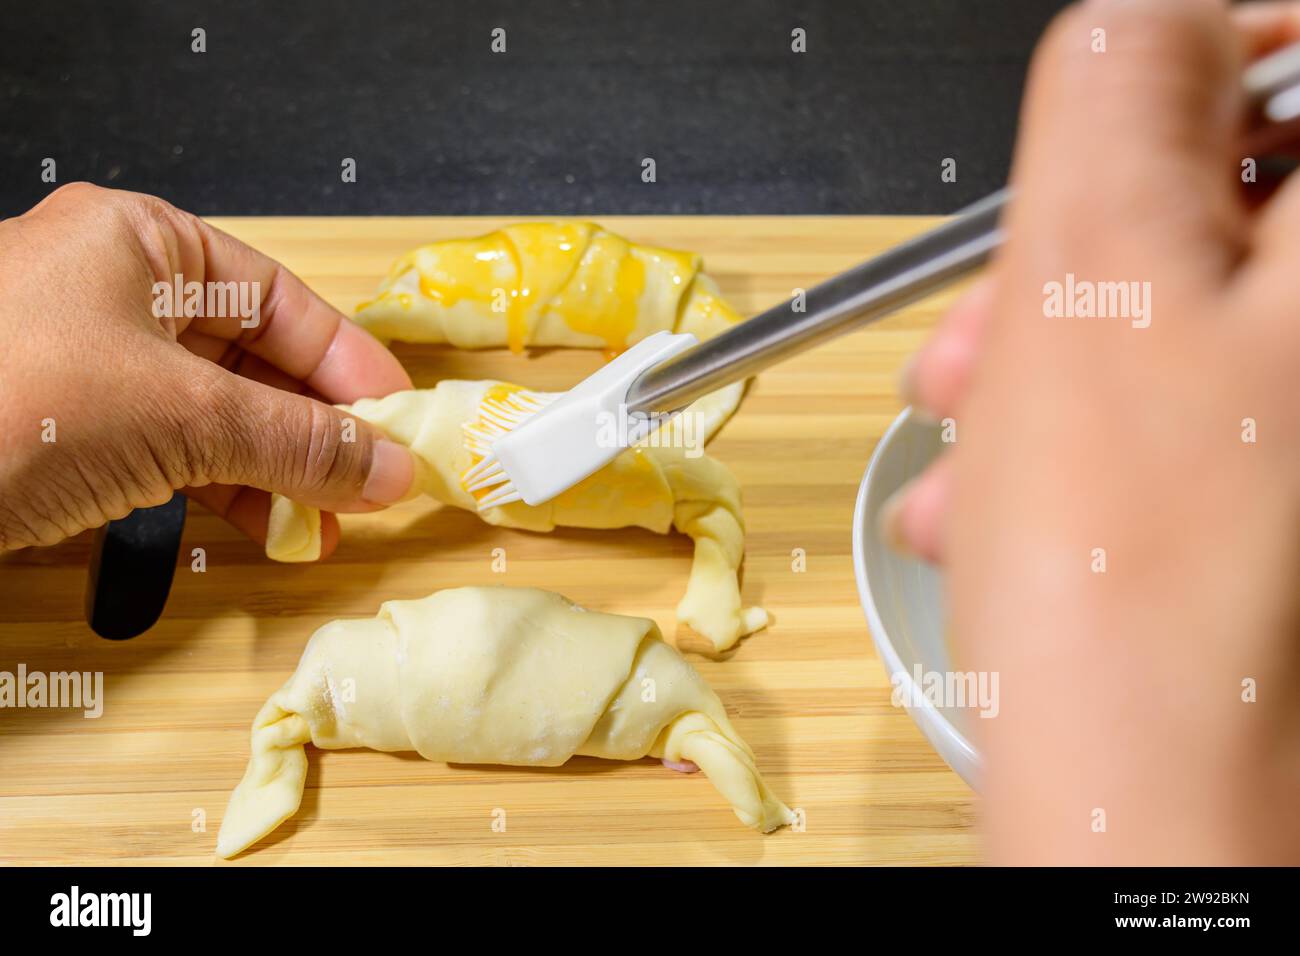 Preparation of croissants, stuffed with ham and cheese and painted with egg yolk, on a wooden board, ready to bake Stock Photo